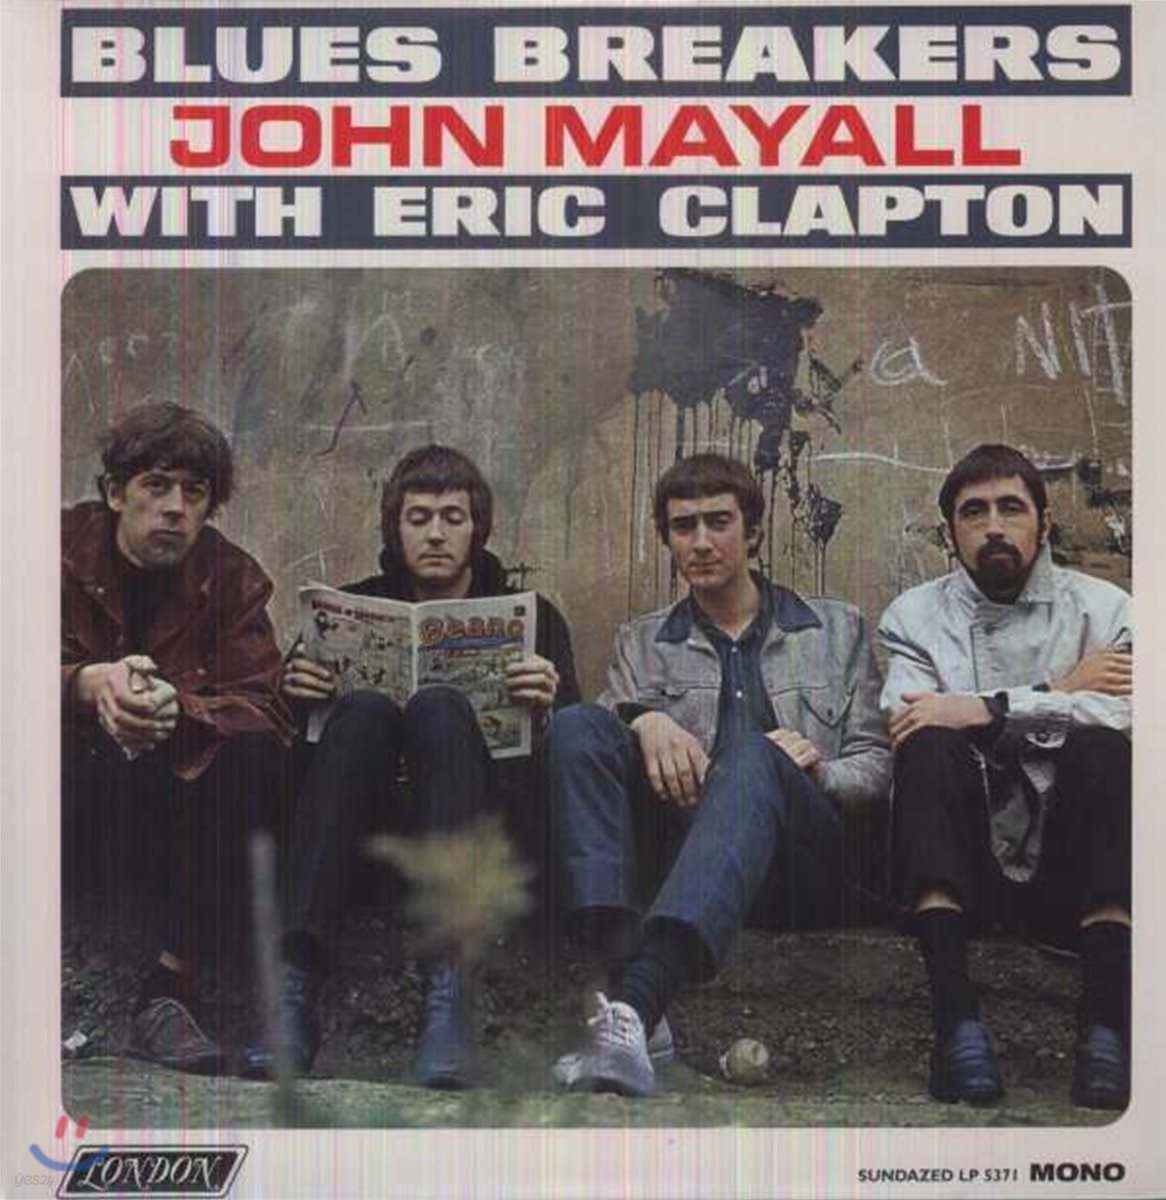 John Mayall And The Blues Breakers - Blues Breakers With Eric Clapton (Mono Edition) [LP]